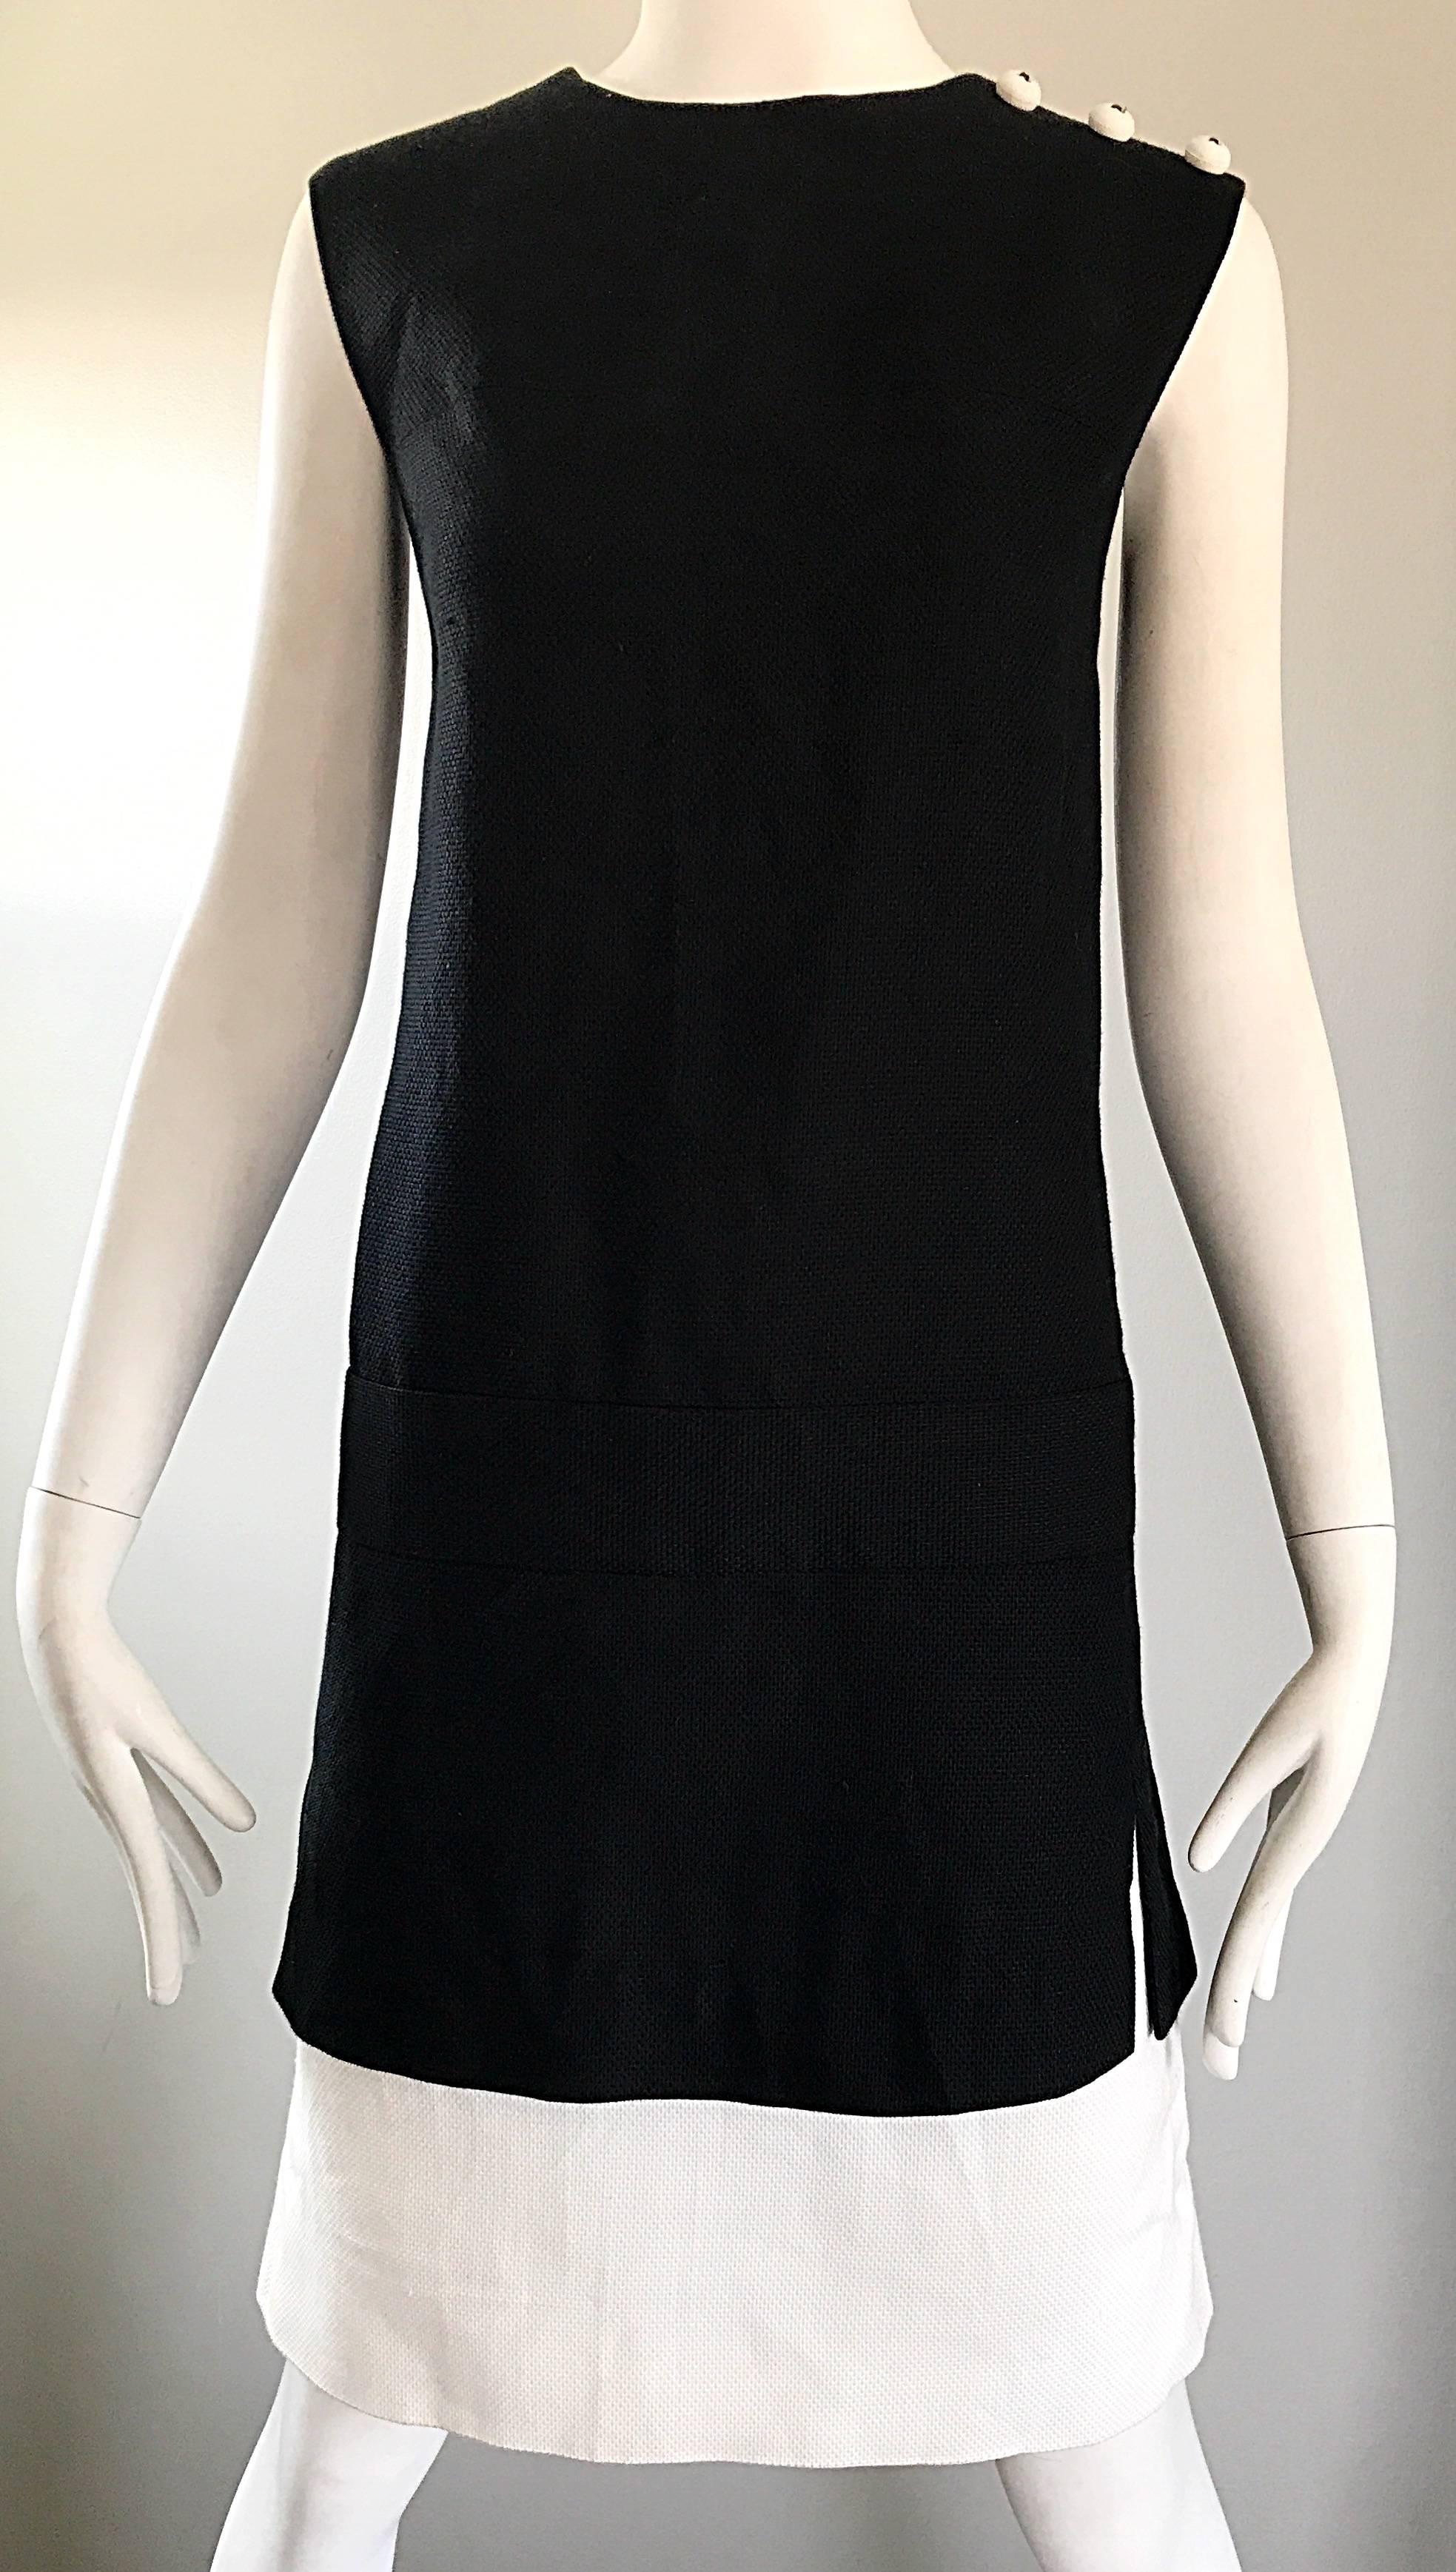 Chic 1960s Howard Wolf Black & White Cotton + Linen Mod Vintage 60s Shift Dress In Excellent Condition For Sale In San Diego, CA